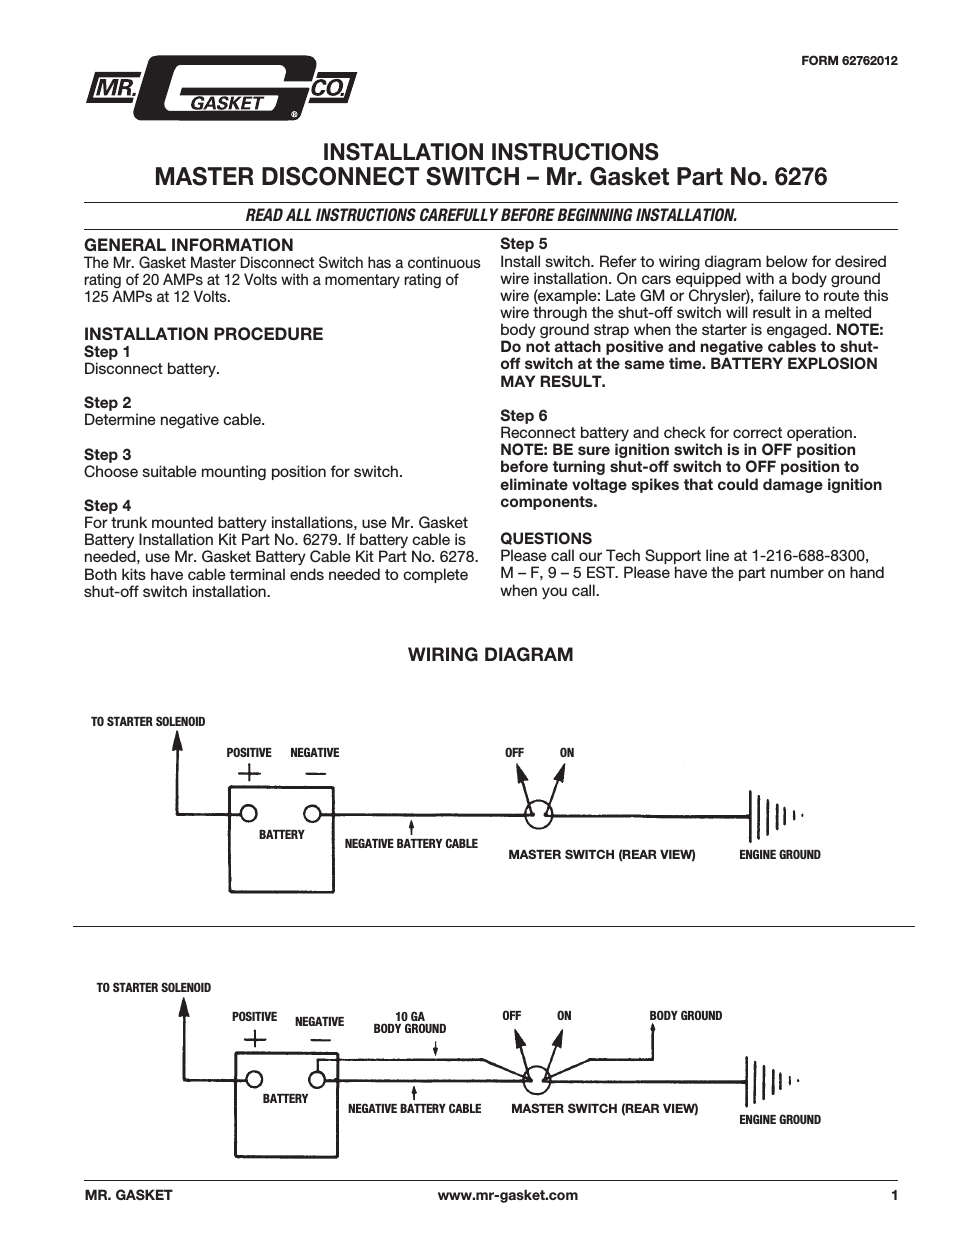 6276 Master Disconnect Switch